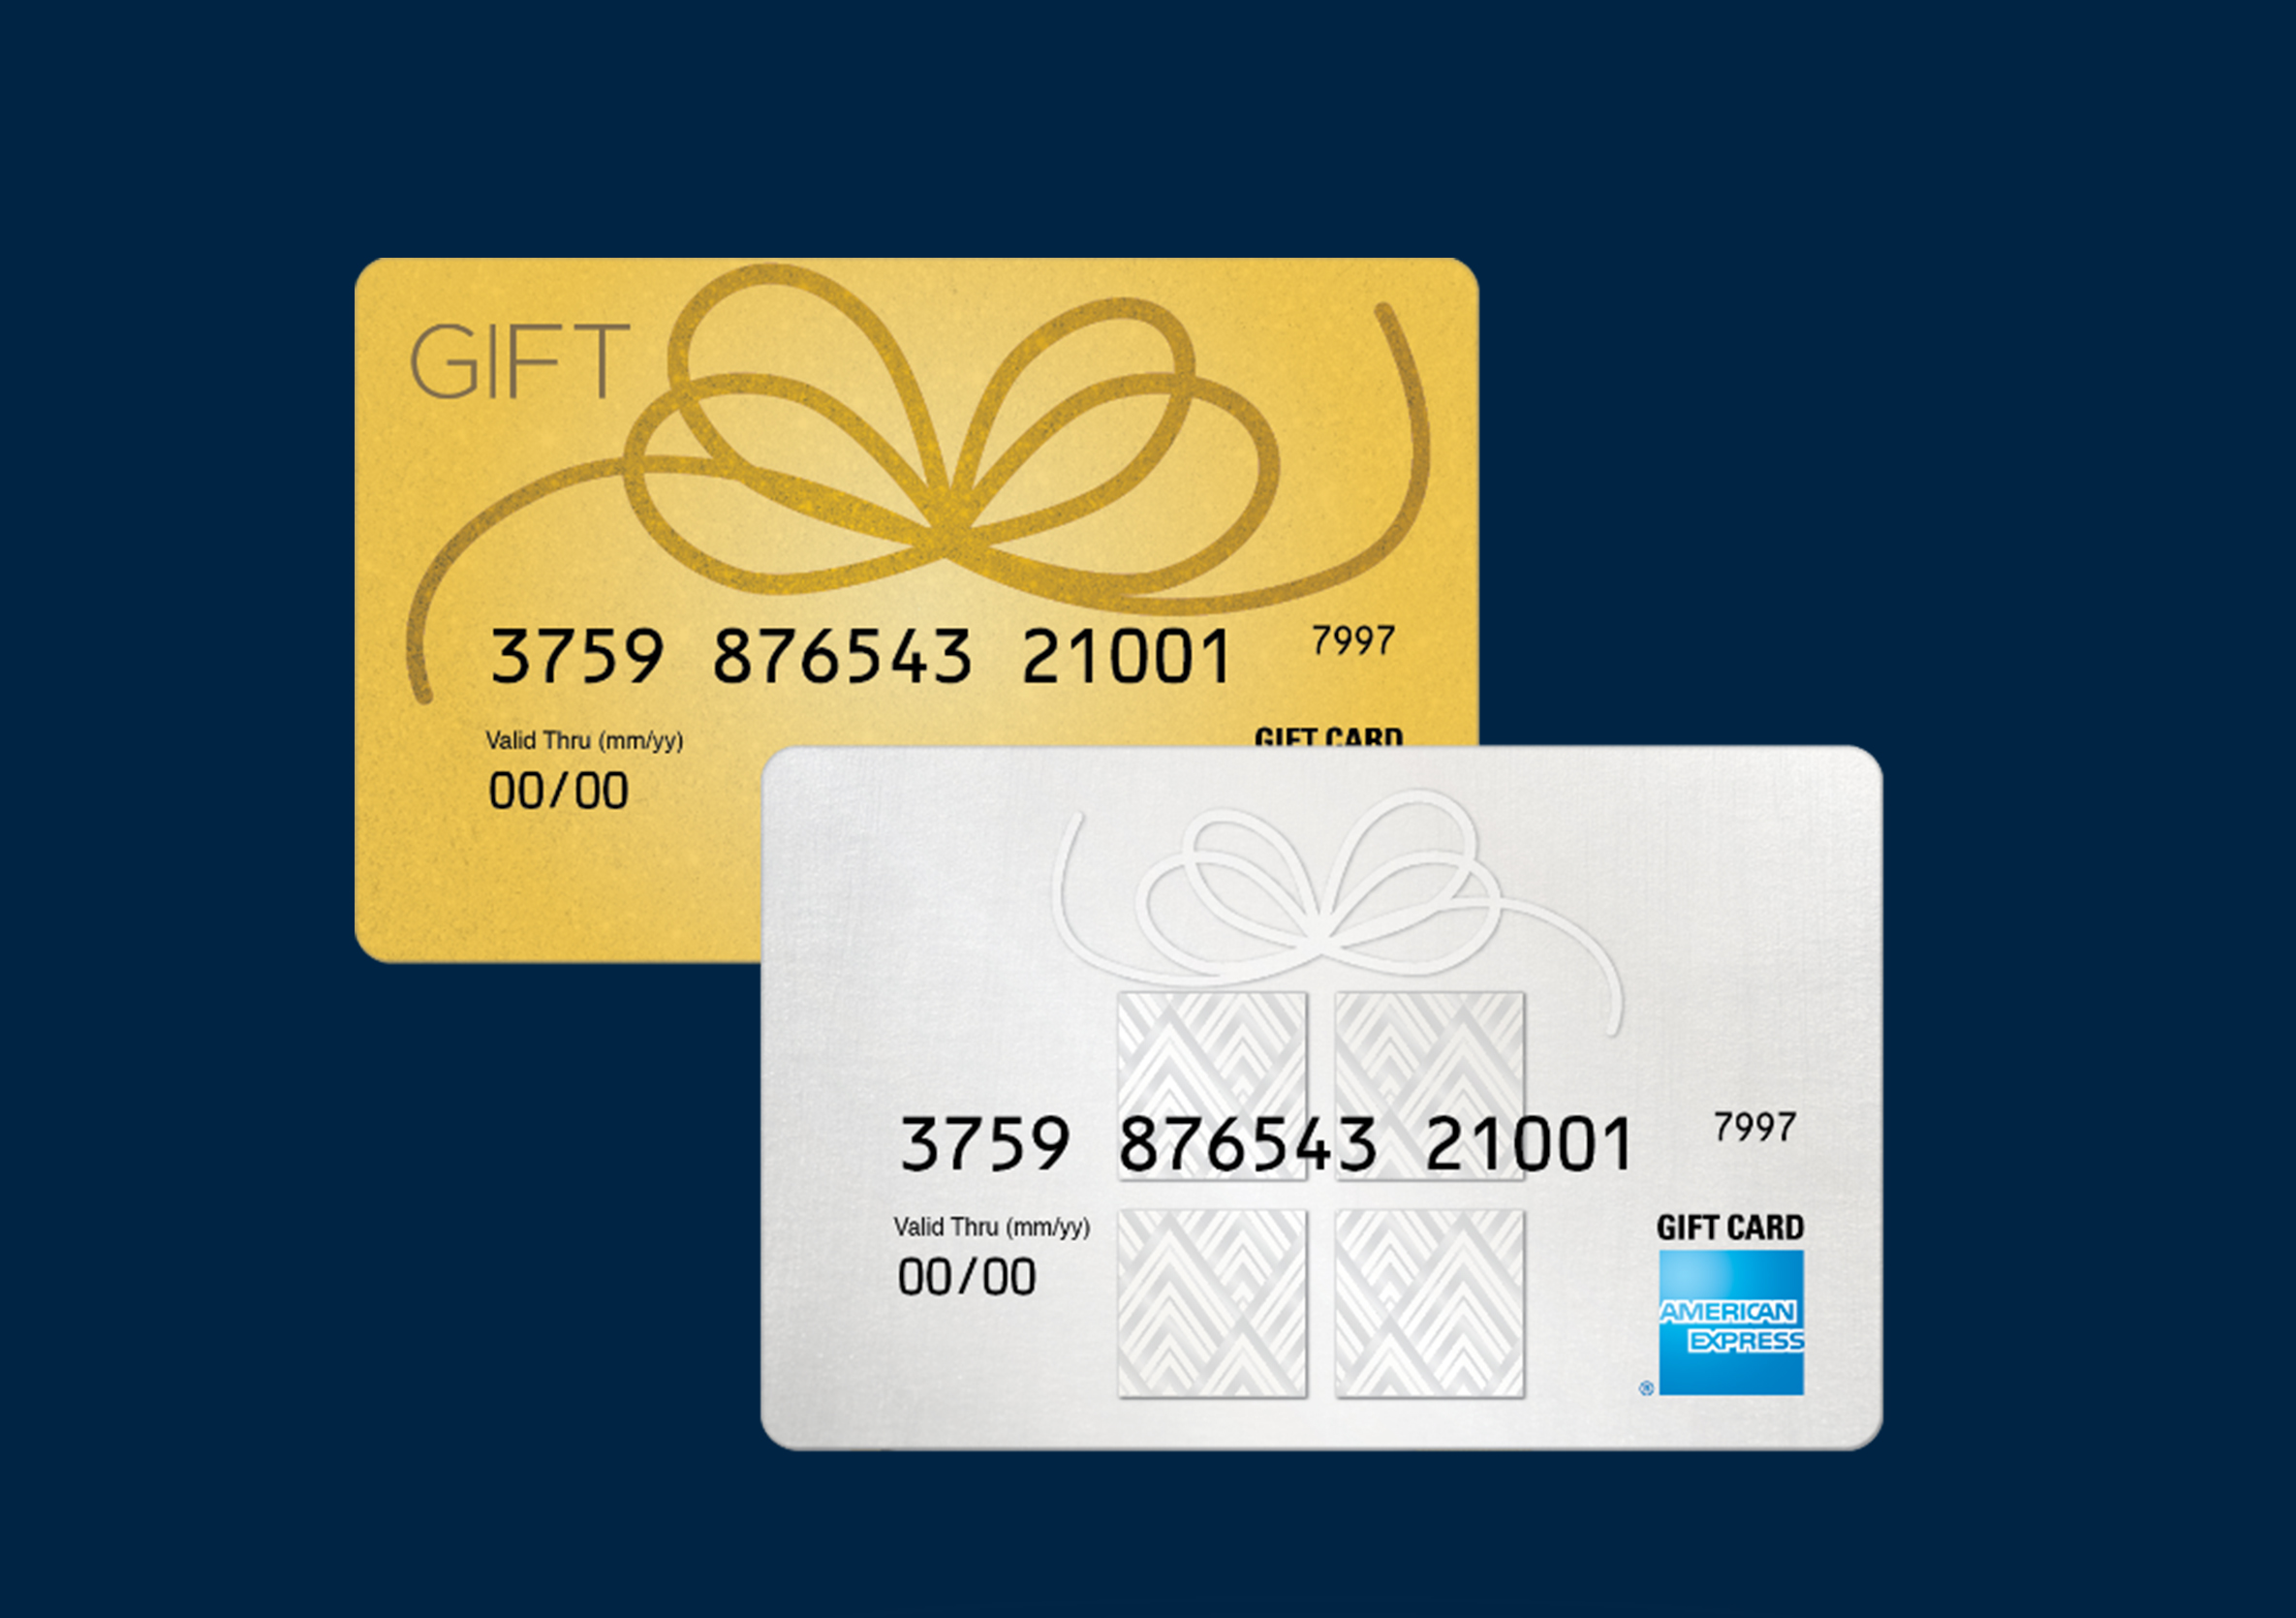 Different Pictures Of AMEX Gift card And How To Identify Them 1